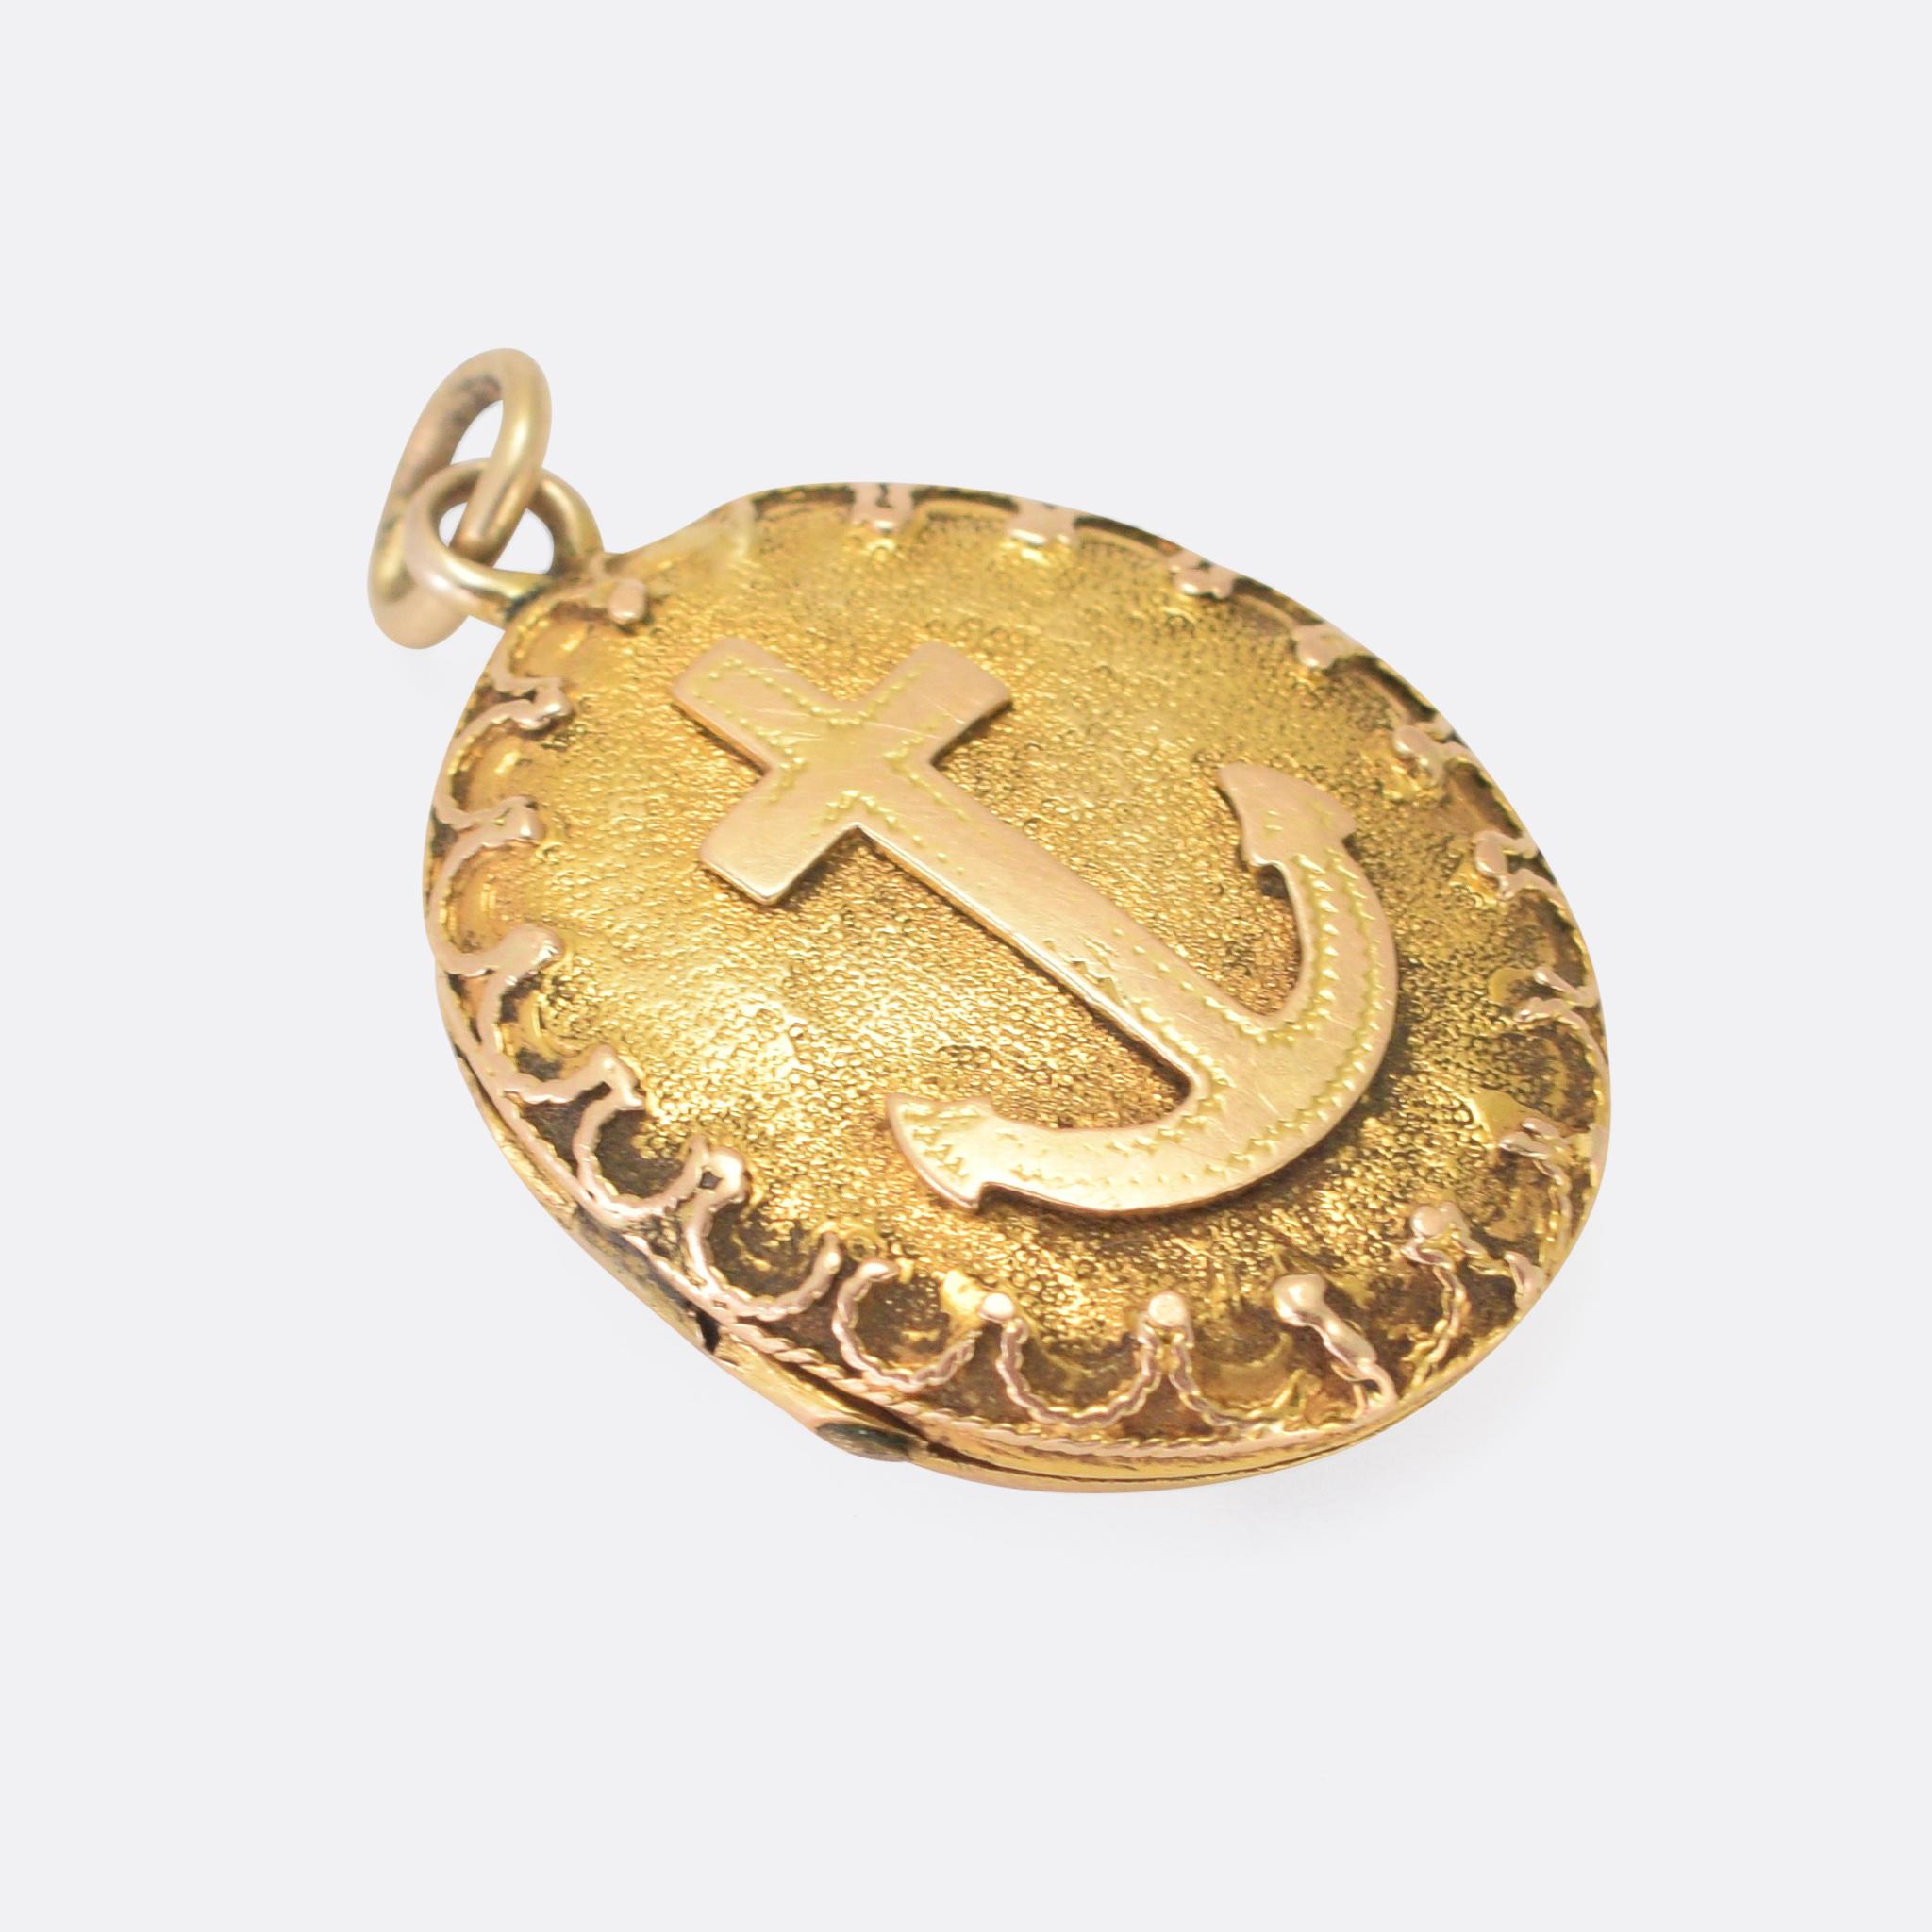 A cool antique oval locket dating from the late Victorian era. The front is furnished with an anchor motif on a finely textured background and all within an ornate applied ropework border. It's crafted in high carat yellow gold, and opens to reveal